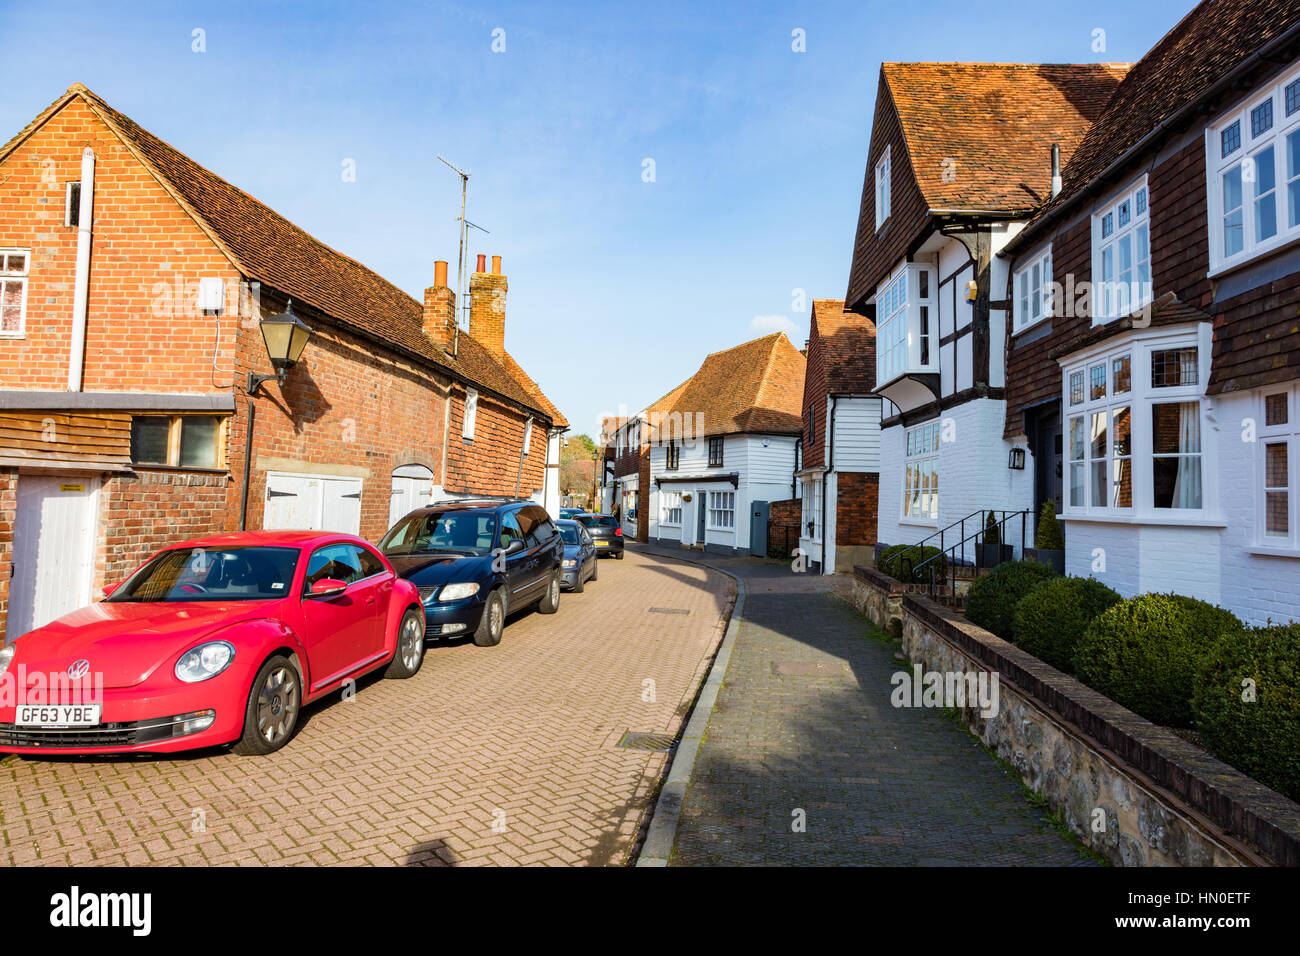 Cottages and cars parked in the village of Hadlow, Church Street, Kent, UK Stock Photo